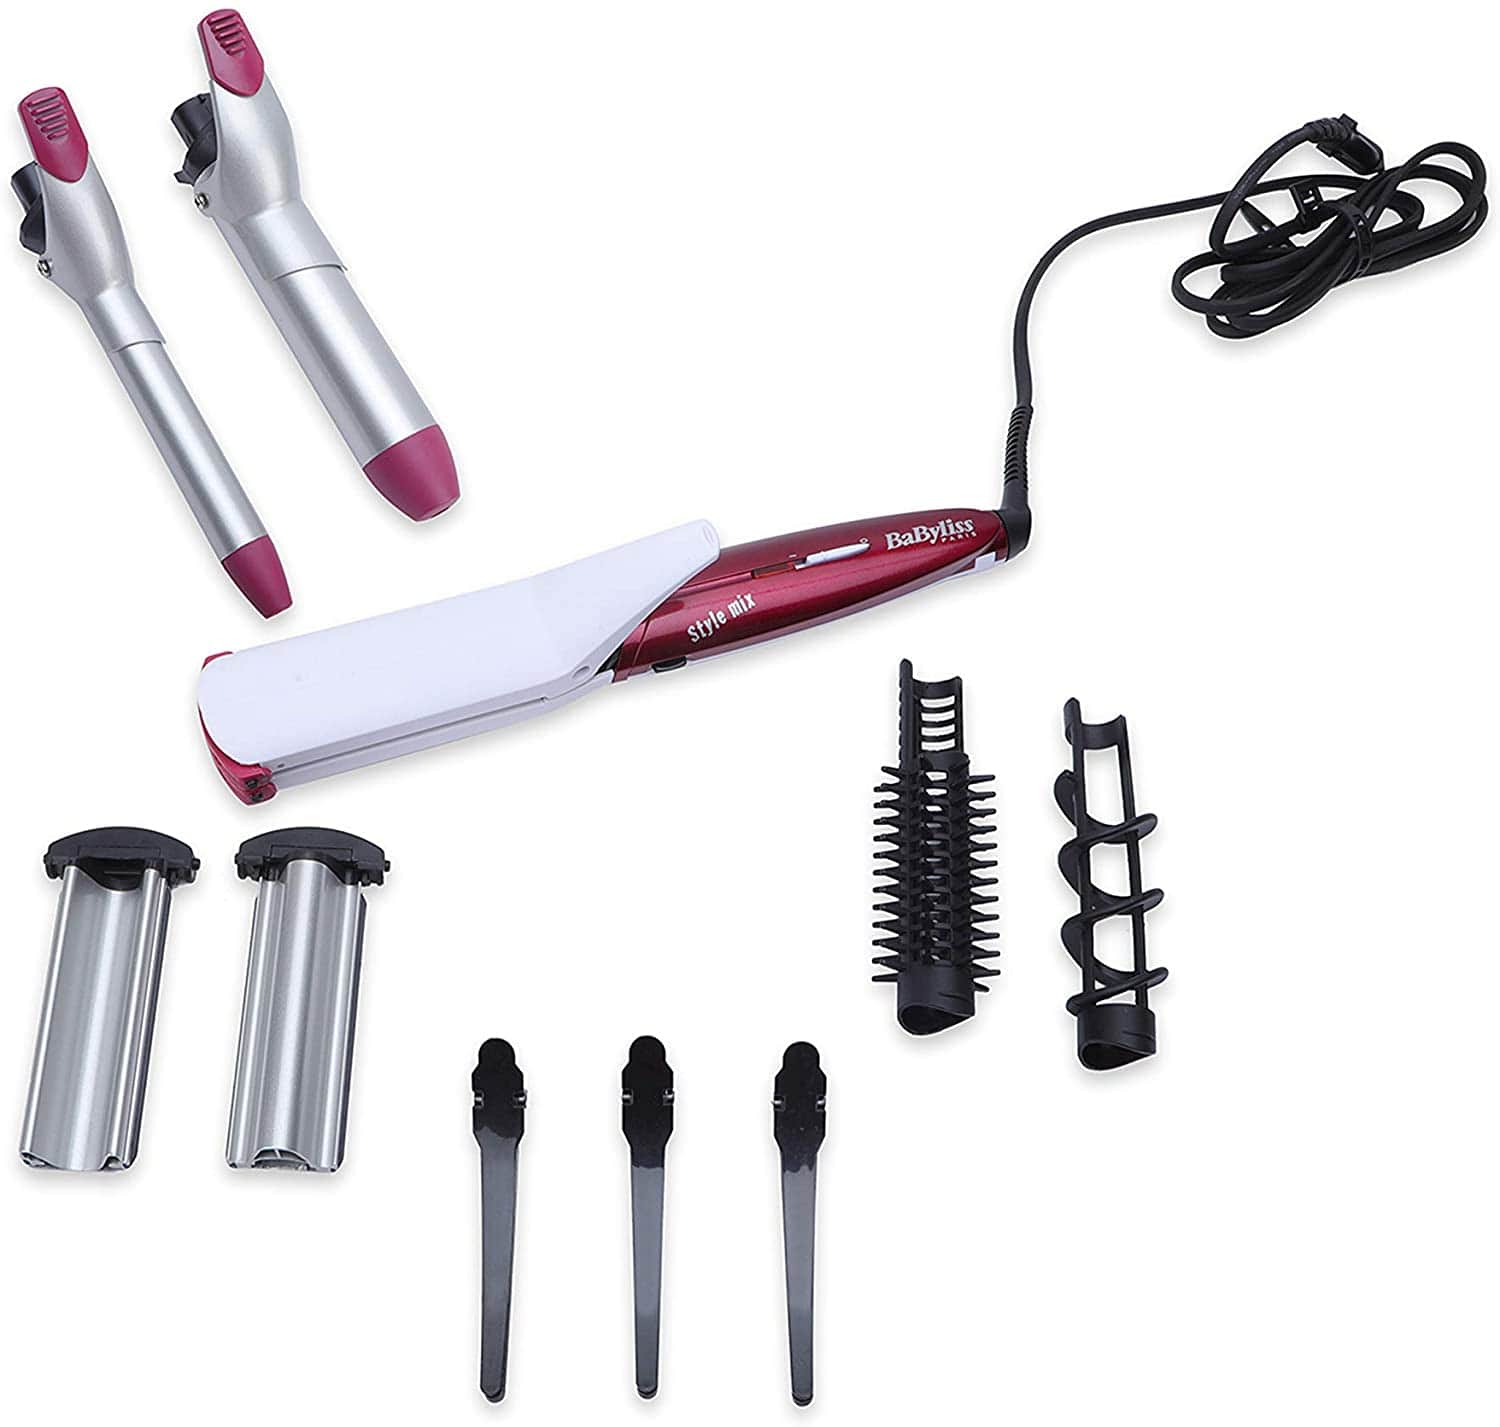 BaByliss Multi Styler Ceramic with 10 Accessories